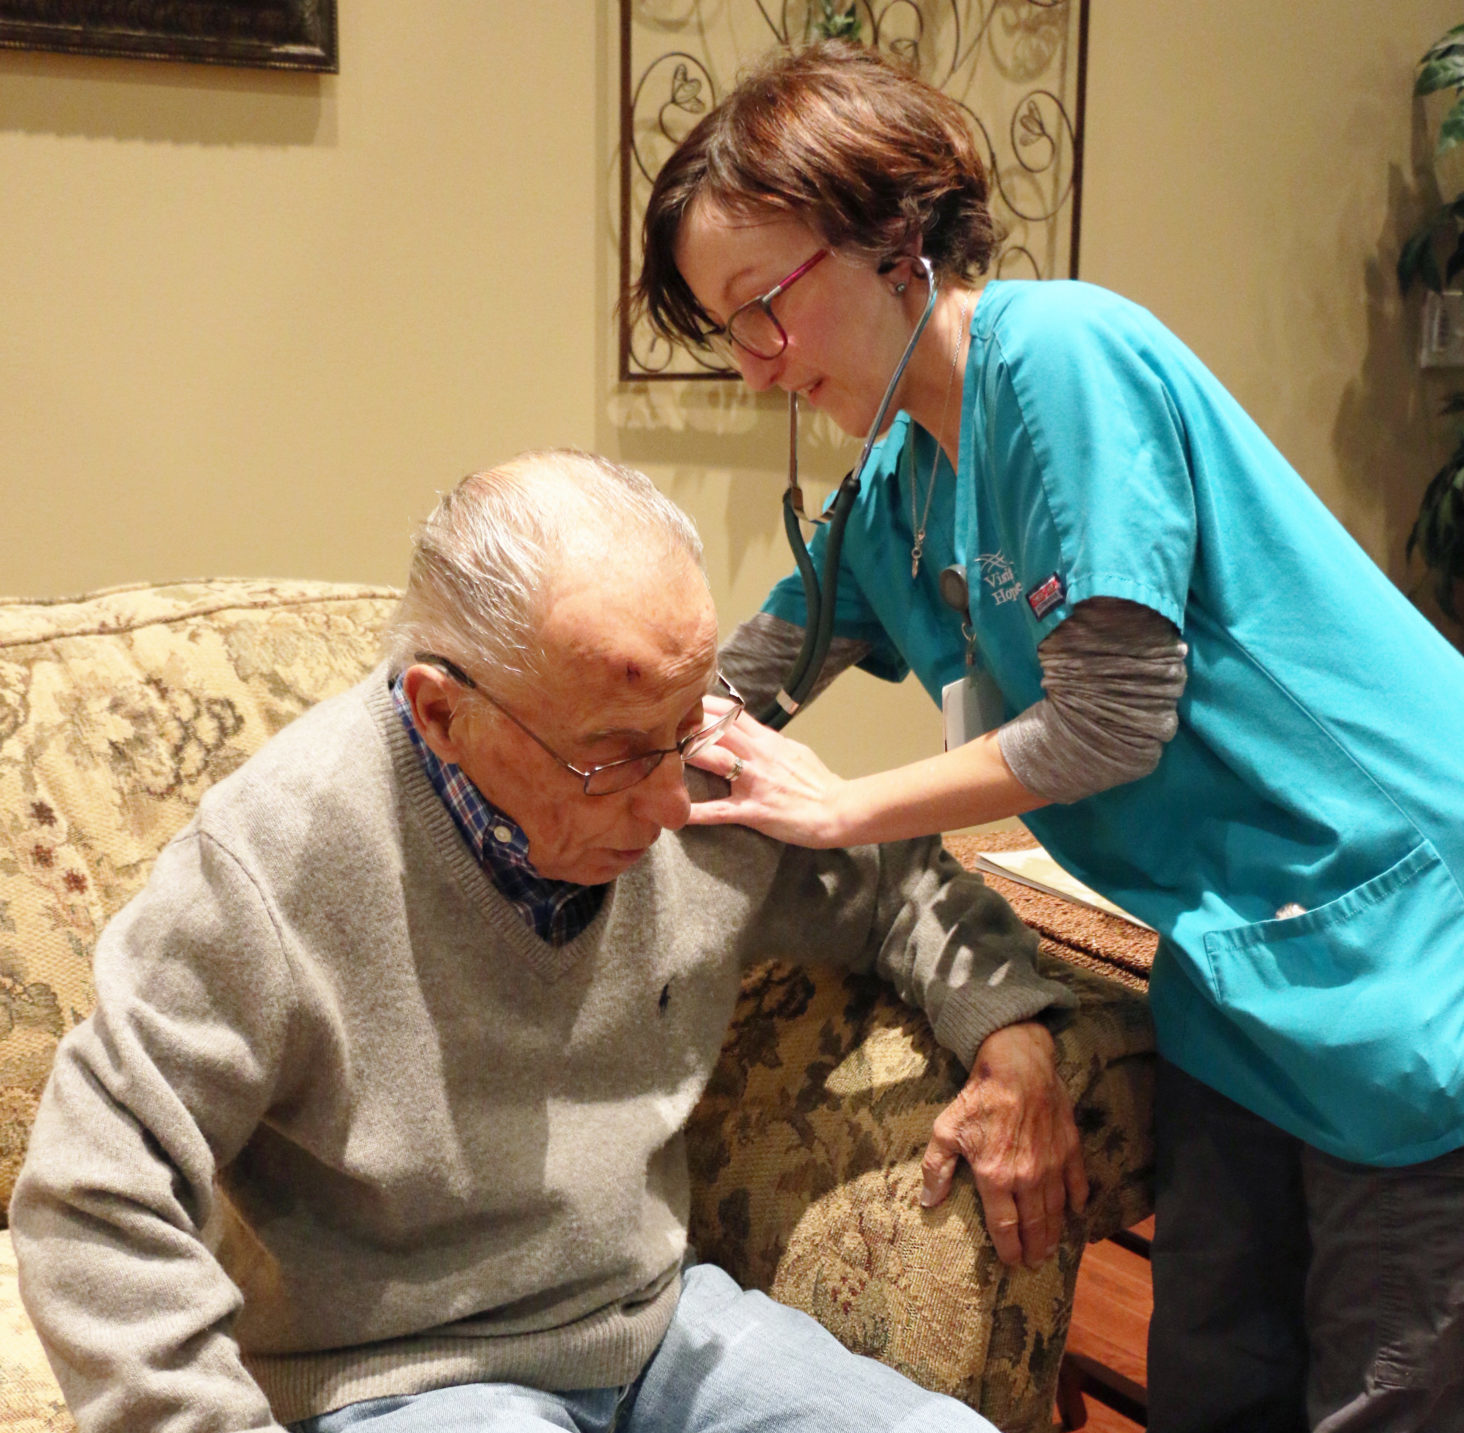 Young clinician with short hair and glasses checks the heart rate of a sitting older gentleman